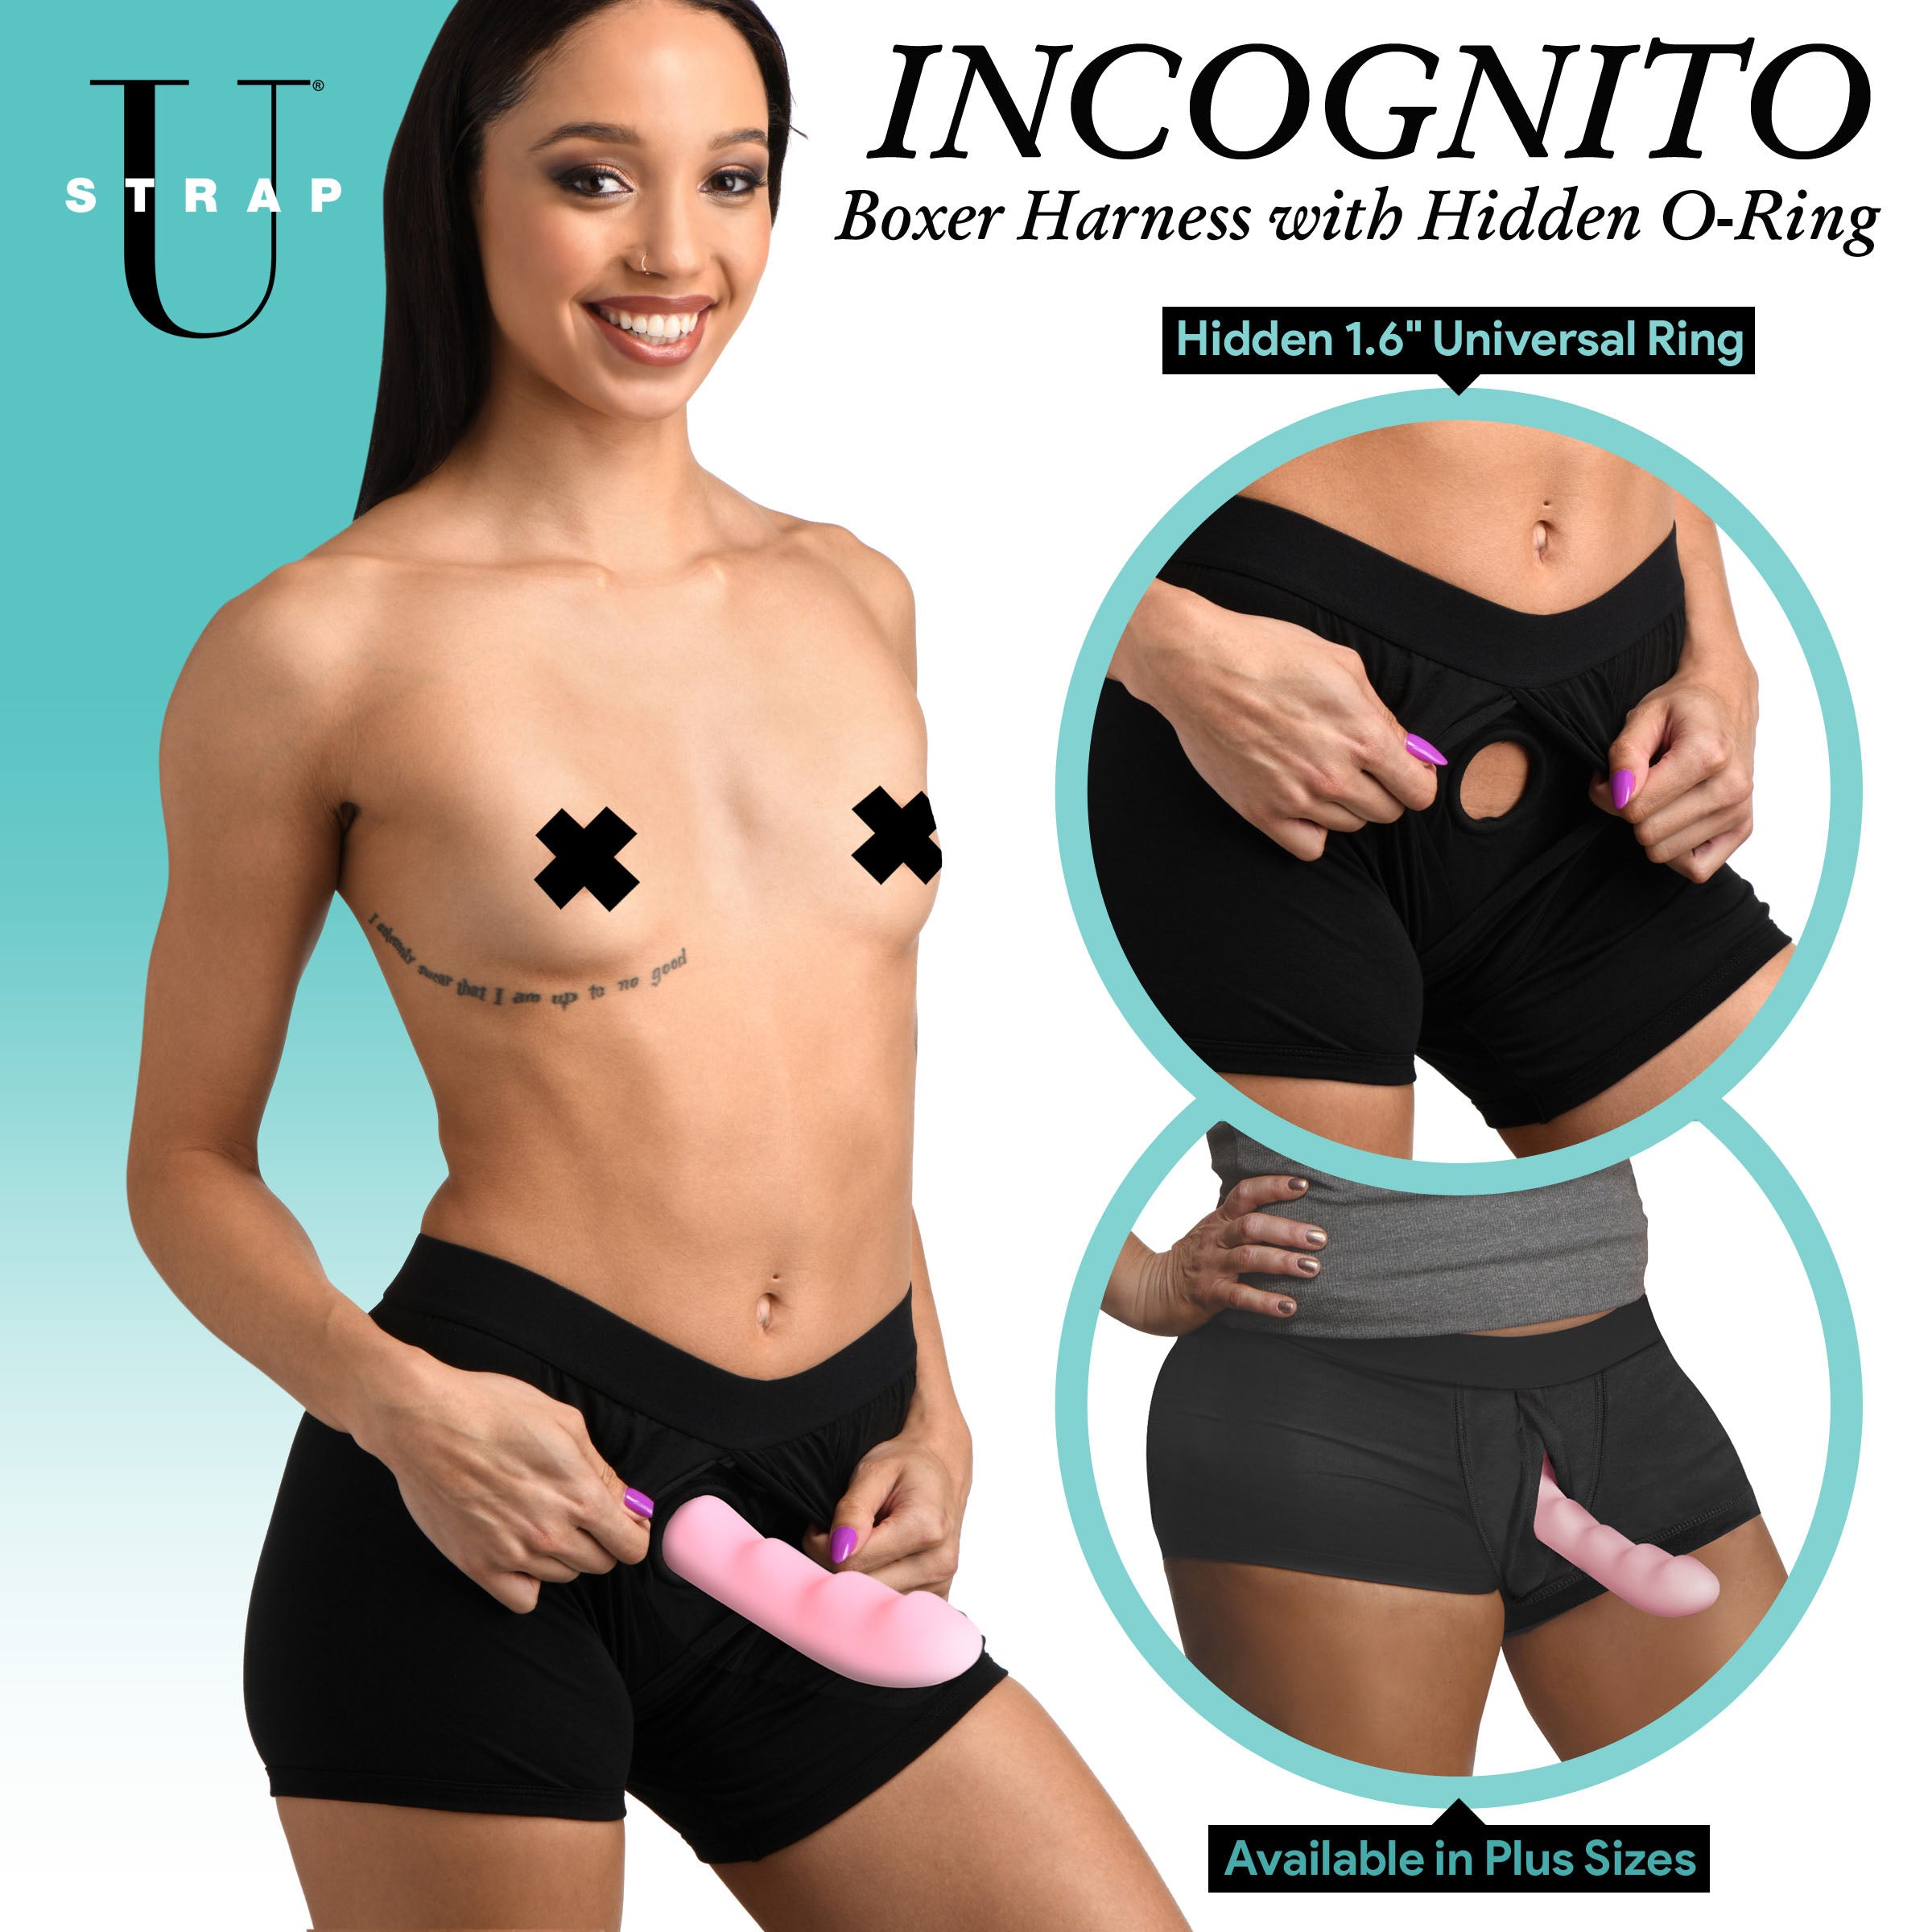 Incognito Boxer Harness with Hidden O-Ring 3XL